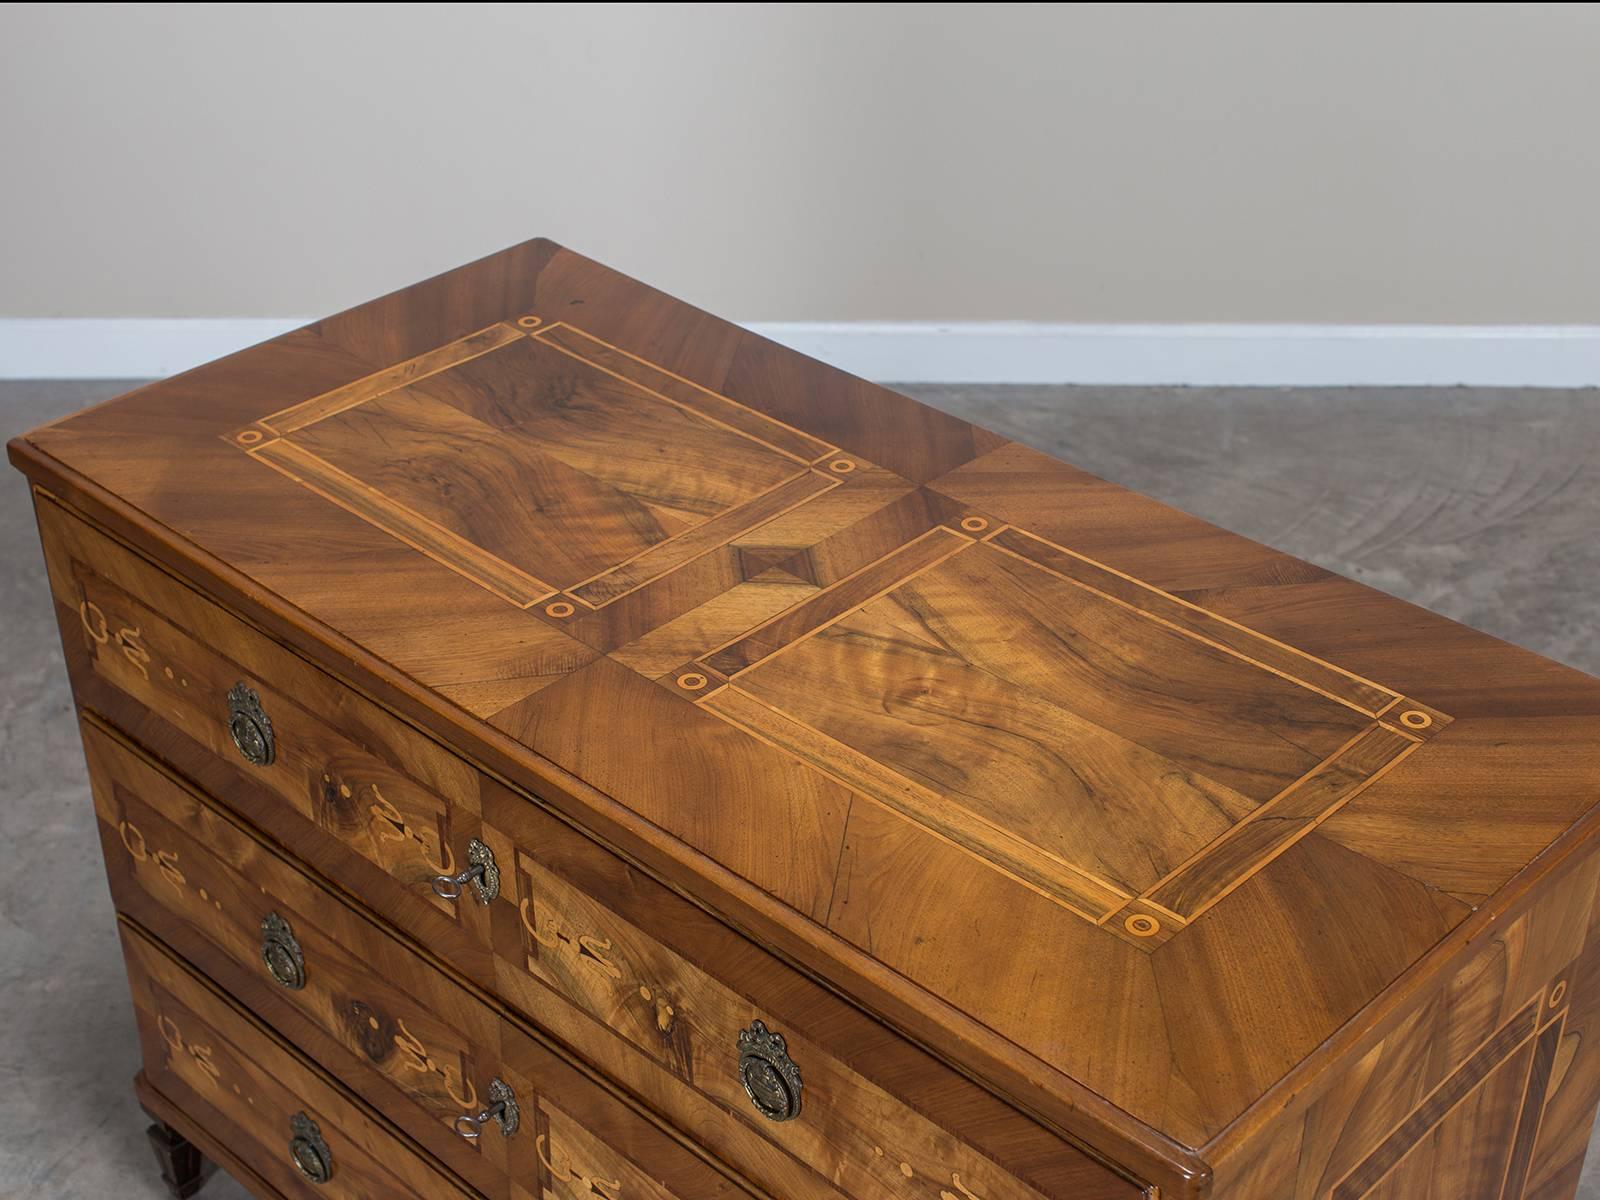 The clean lines of this handsome antique German walnut chest of drawers are enhanced by the use of geometric shaped inlay in contrasting colors. The lavish use of walnut, rosewood and satinwood and the fact that the top, front and both sides are